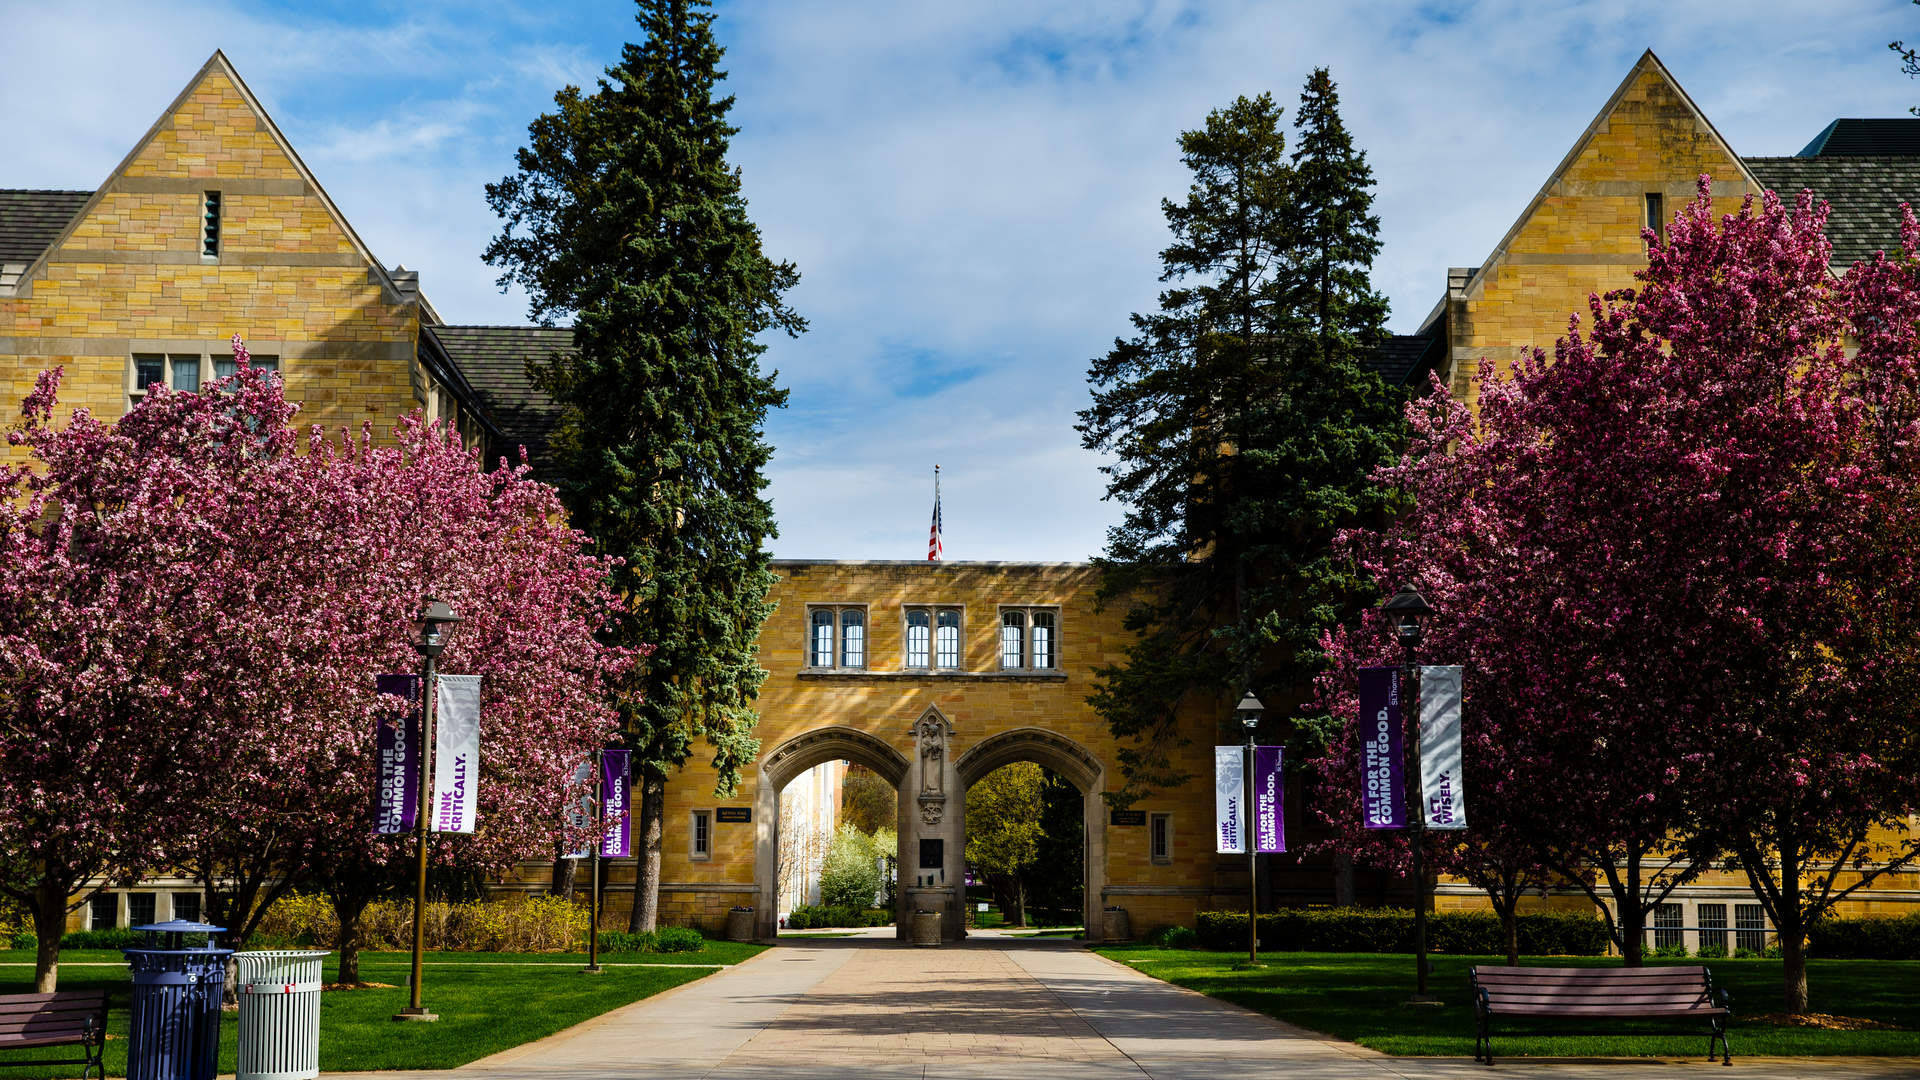 St. Thomas north campus outside with archway and trees in bloom